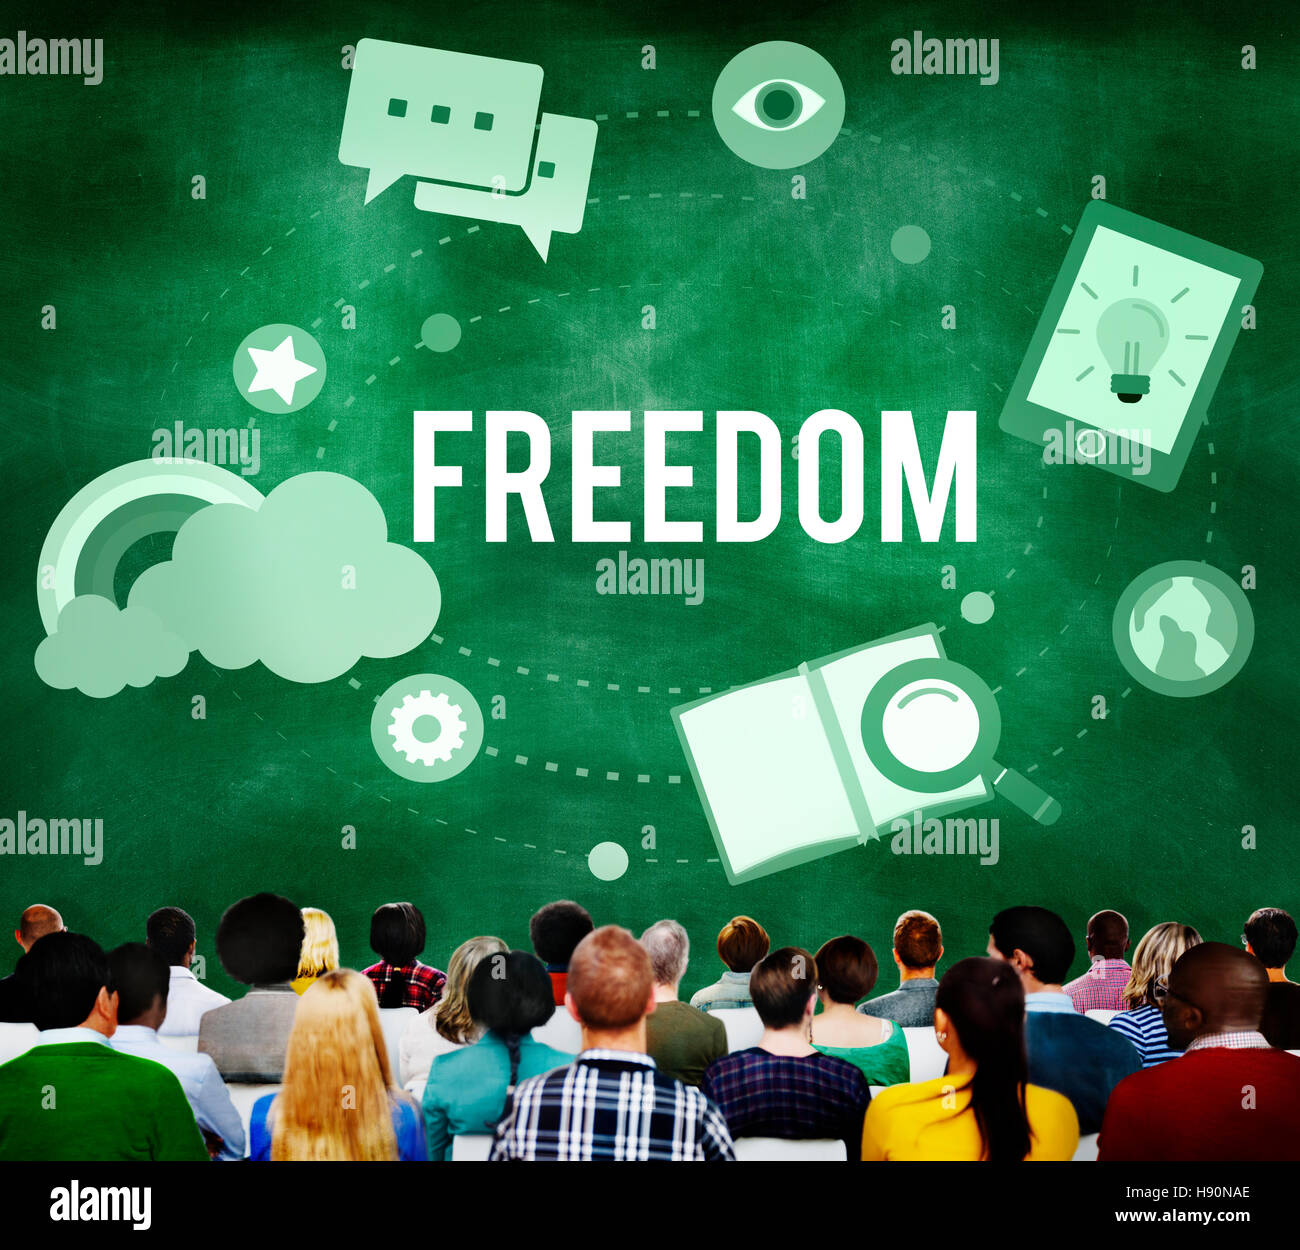 Freedom Free Inspiration Emancipation Independence Concept Stock Photo